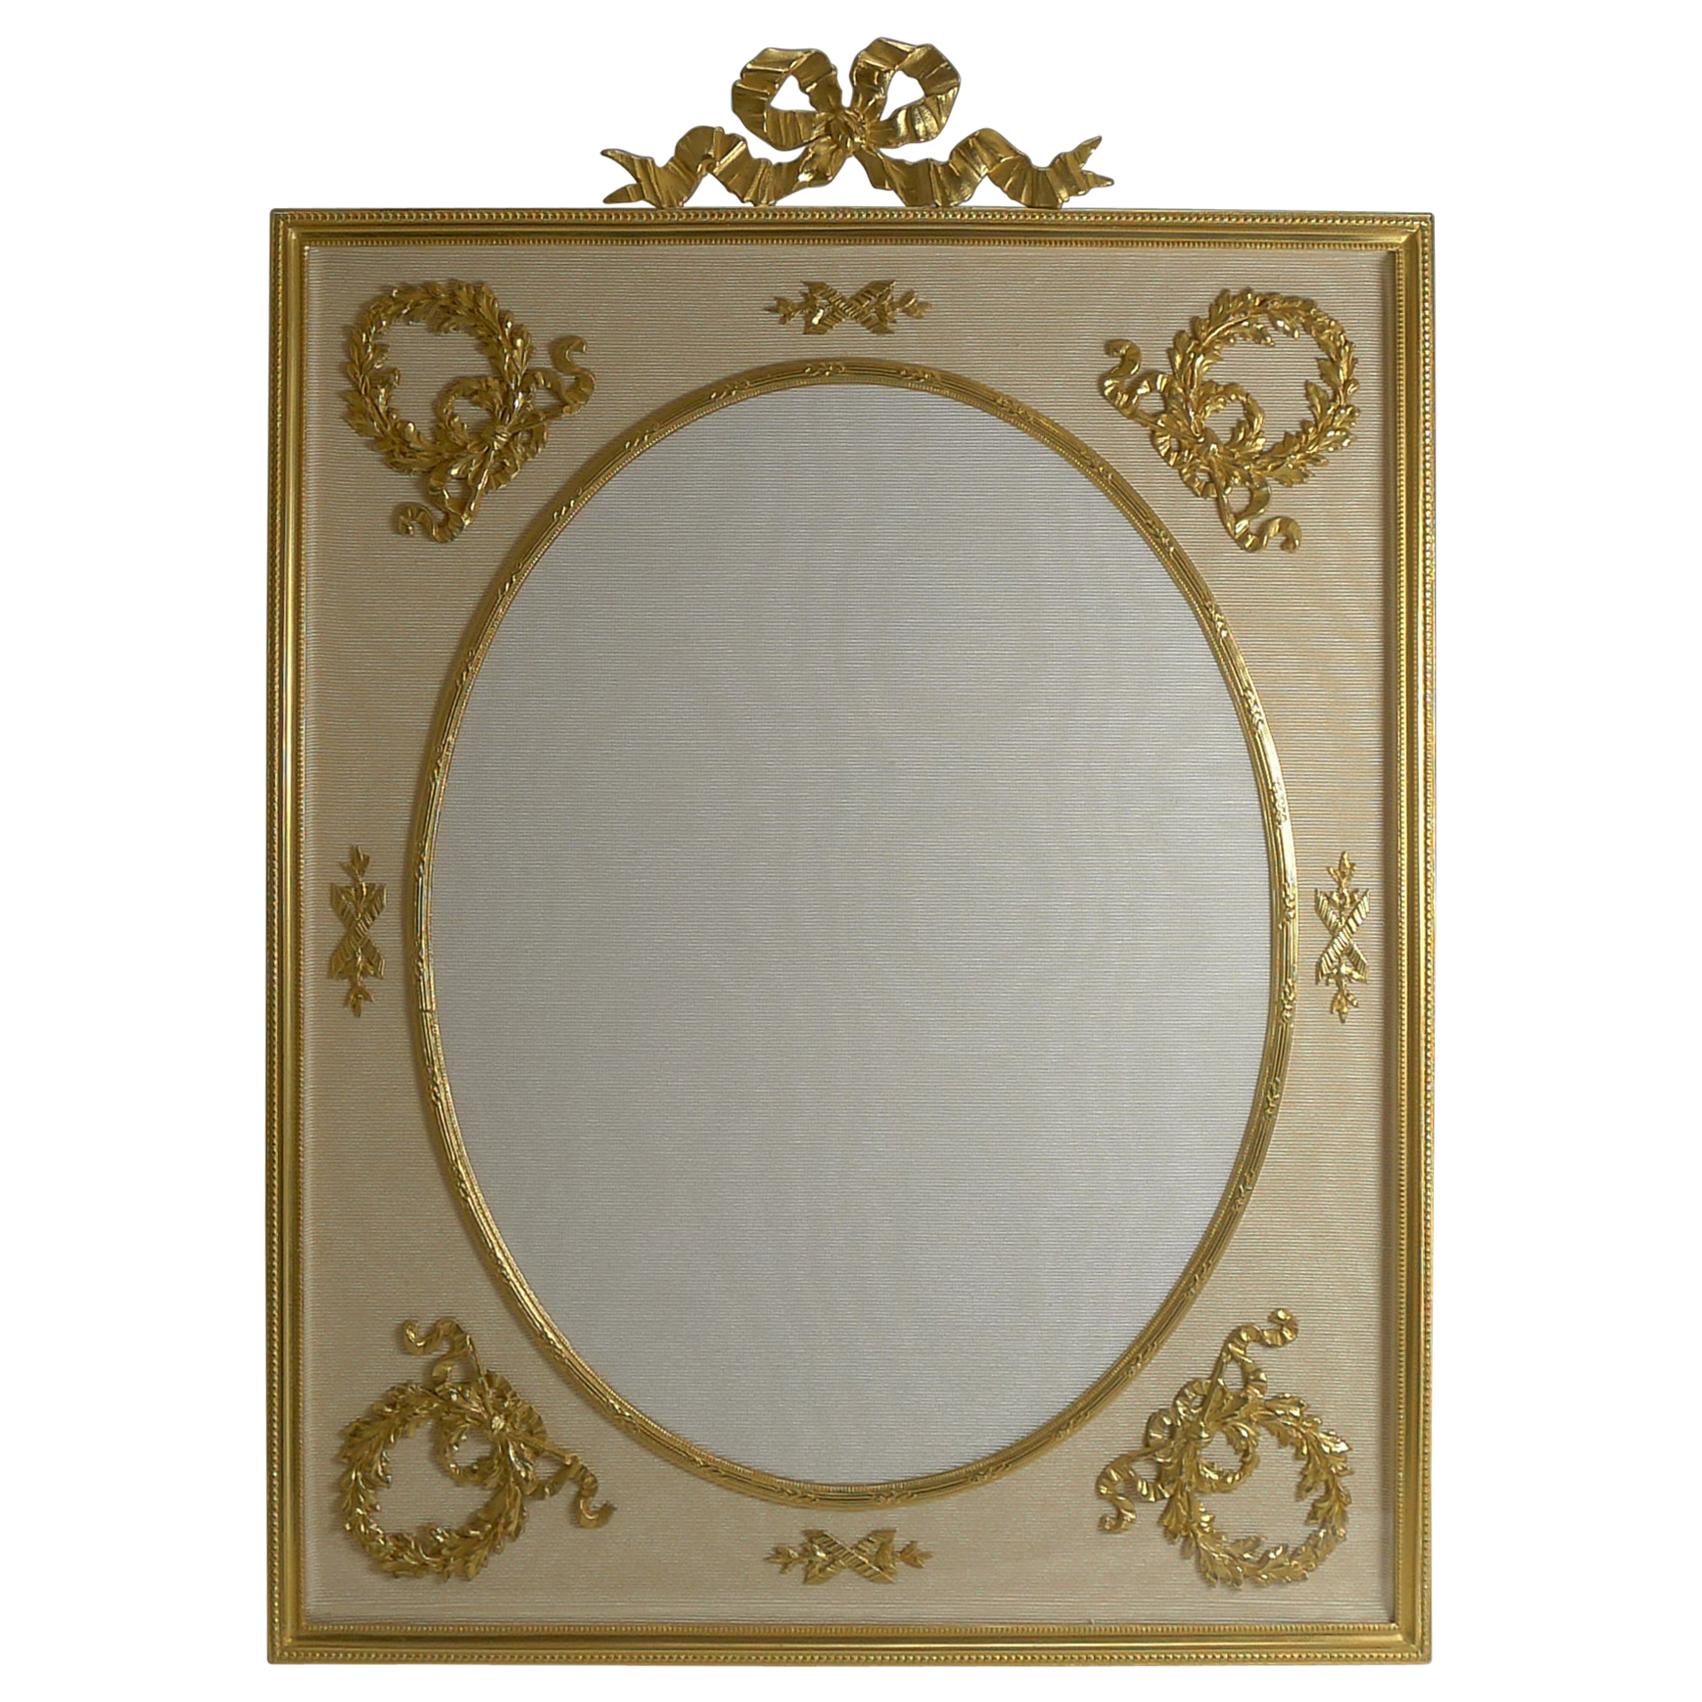 Grand French Gilded Bronze Photograph / Picture Frame, circa 1900